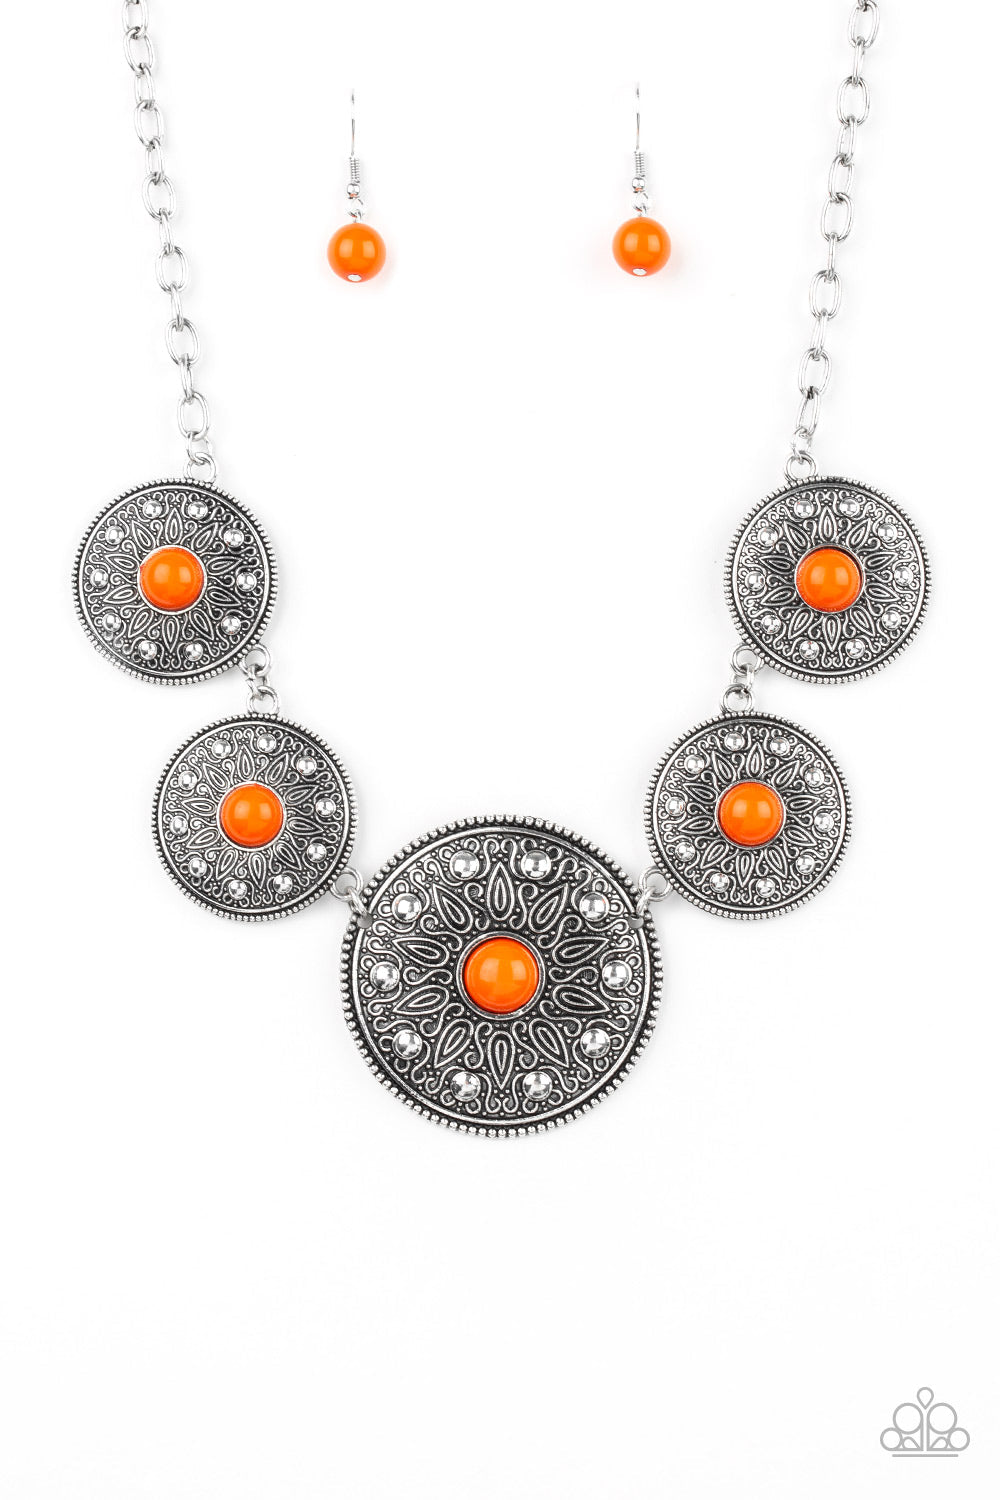 Hey, SOL Sister - Orange and Silver Necklace - Paparazzi Accessories - Round silver frames radiating with sunburst patterns link below the collar. Infused with shiny silver studs, the tribal inspired frames are dotted with robust orange beaded centers for a colorful necklace.